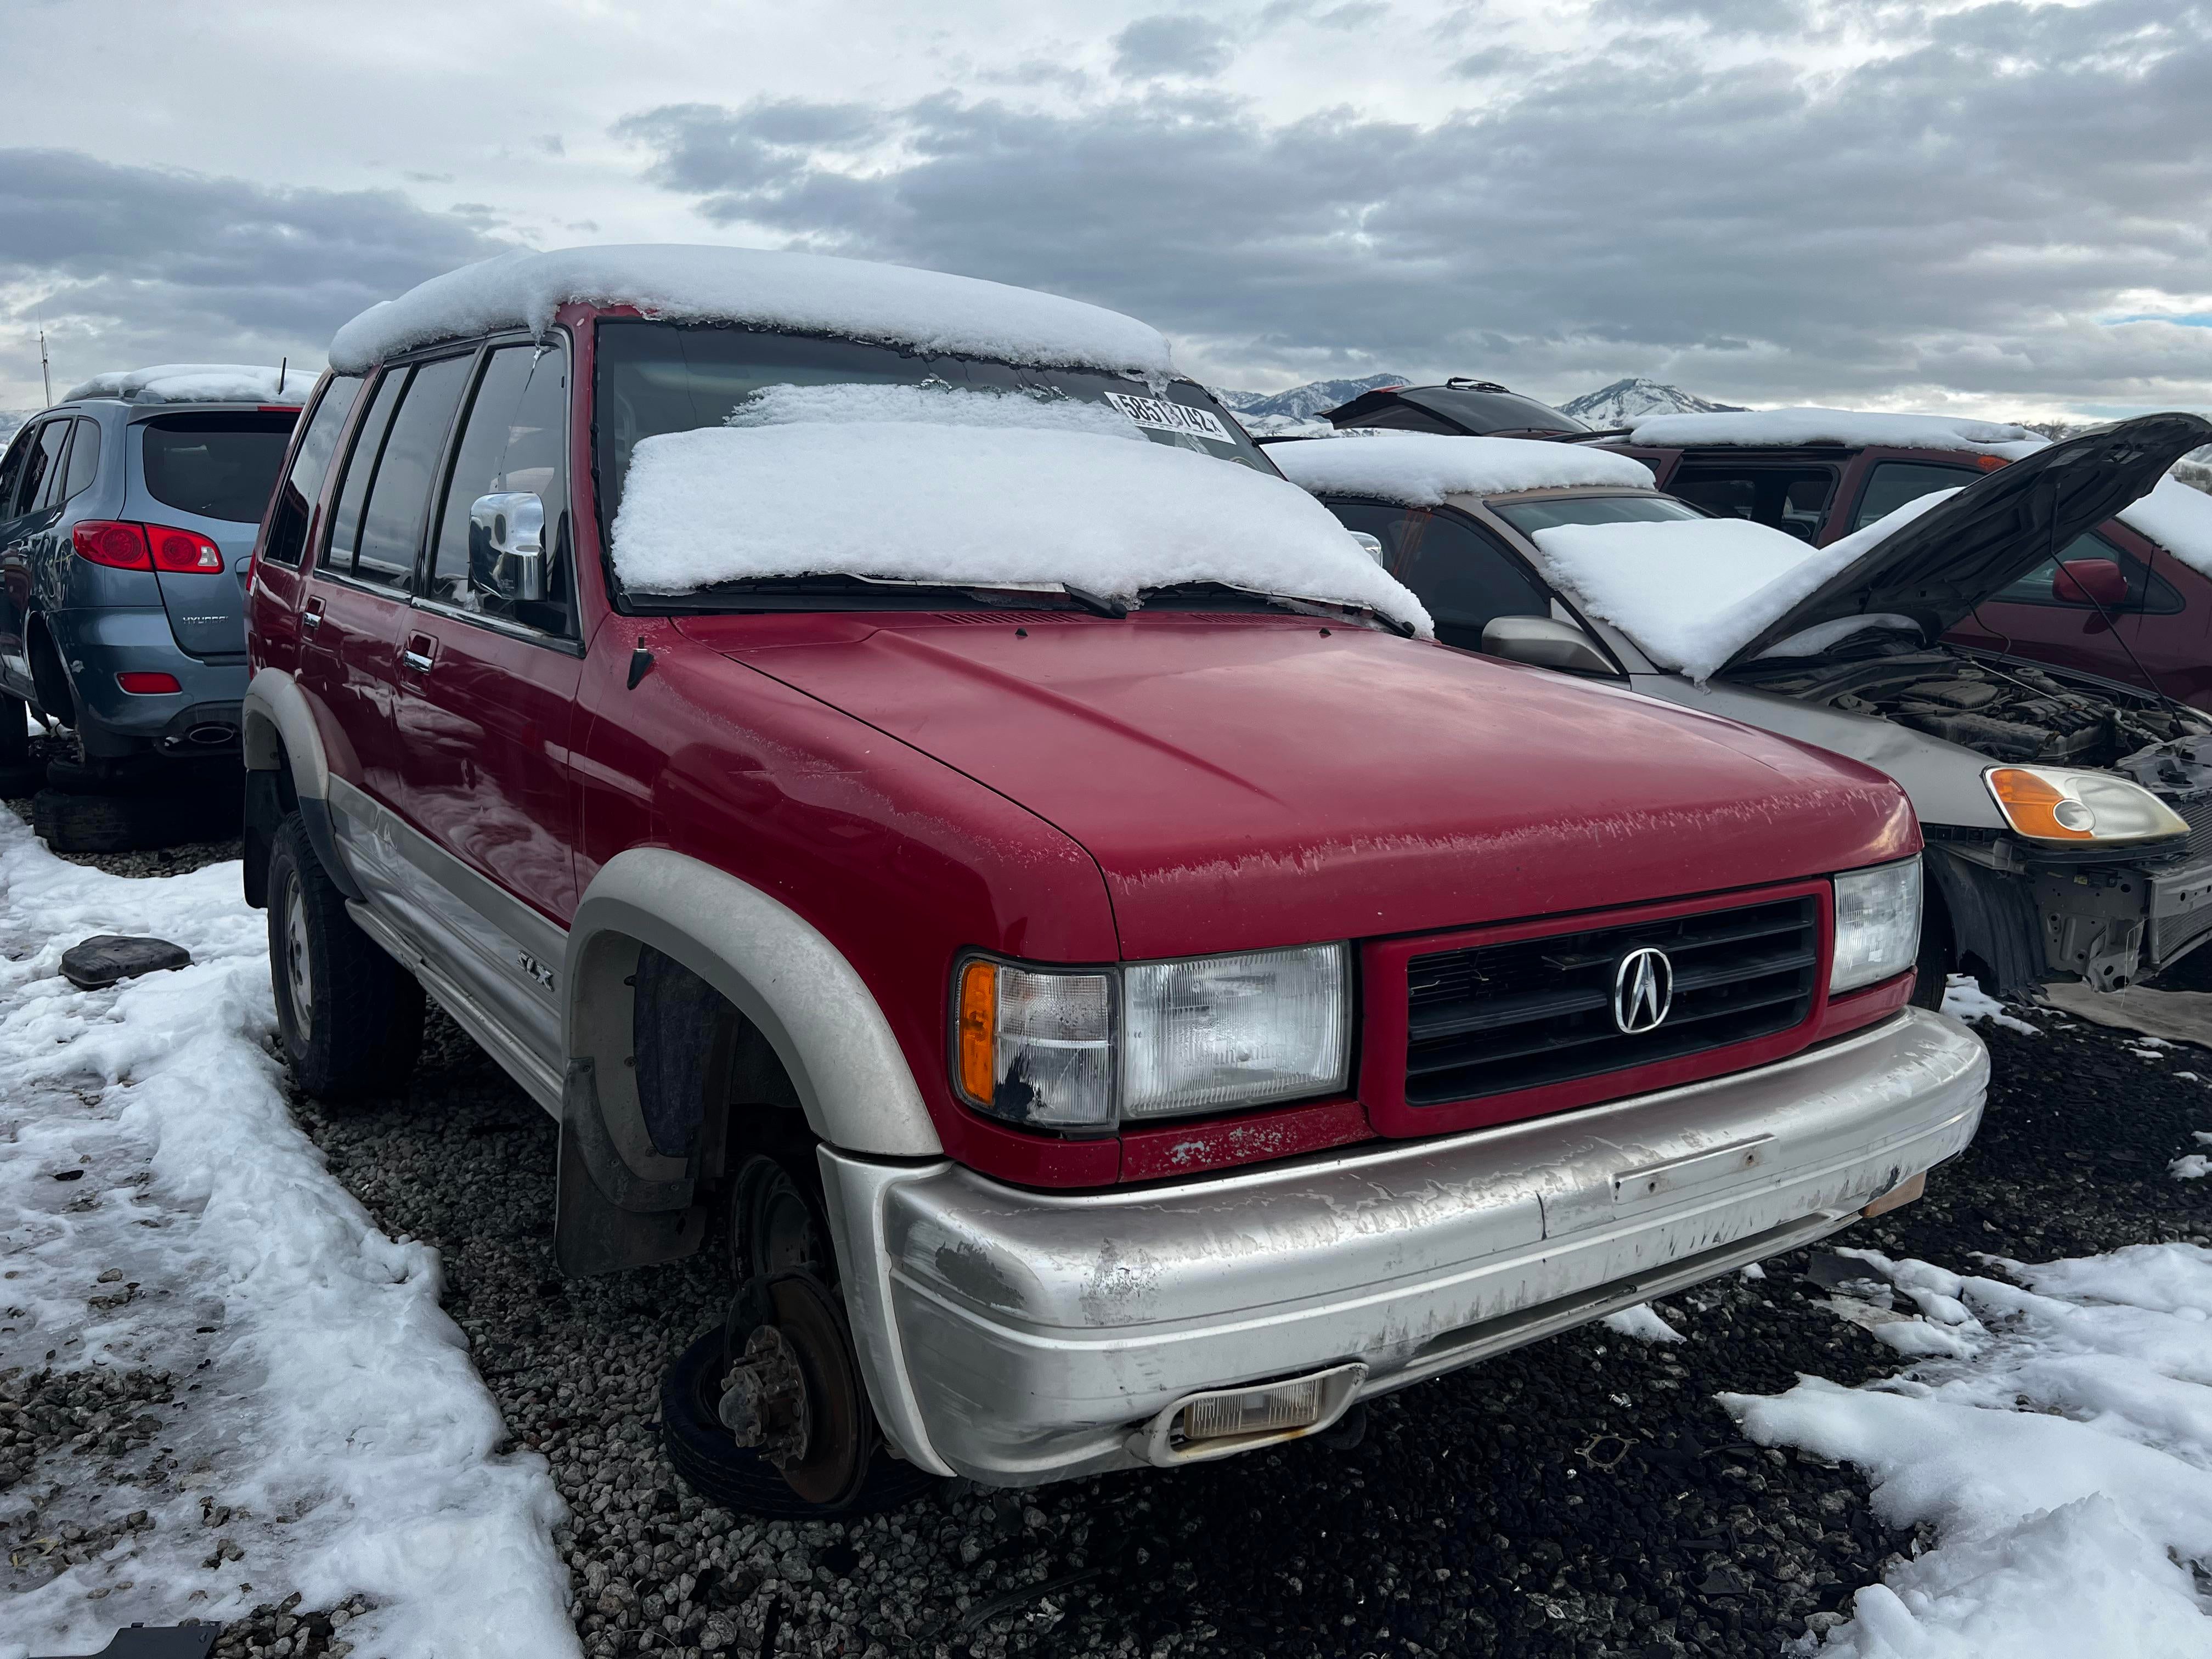 Been a while since I've seen one these in the wild. The Acura SLX (Isuzu  Trooper) : r/Acura